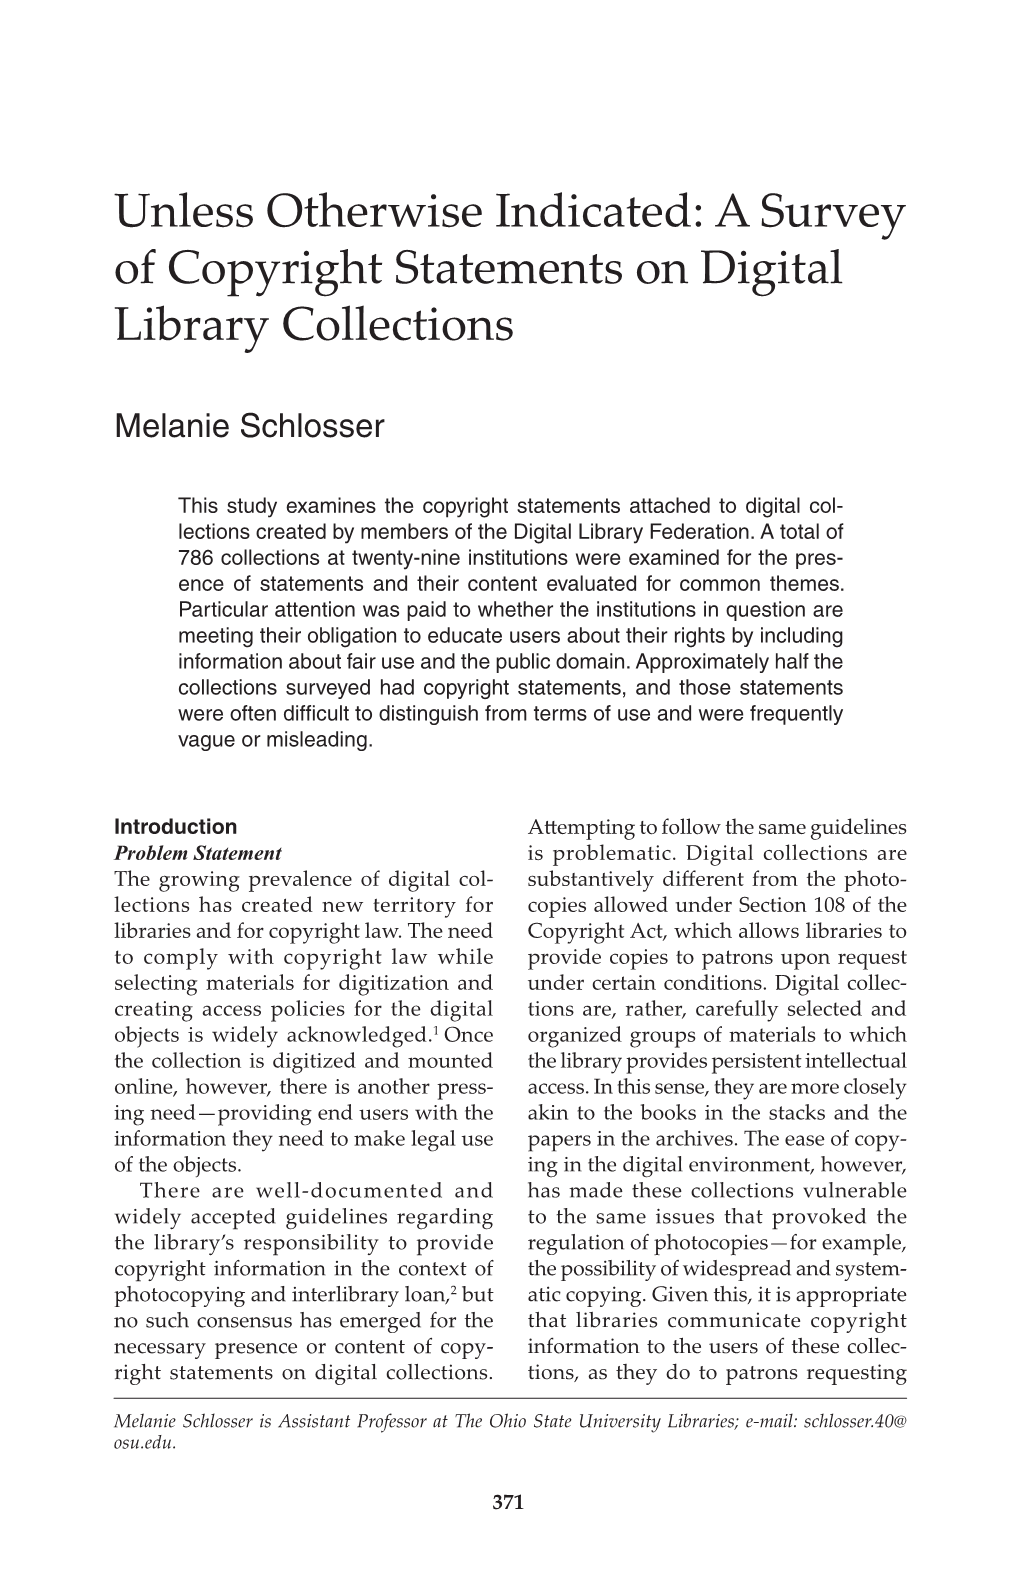 A Survey of Copyright Statements on Digital Library Collections